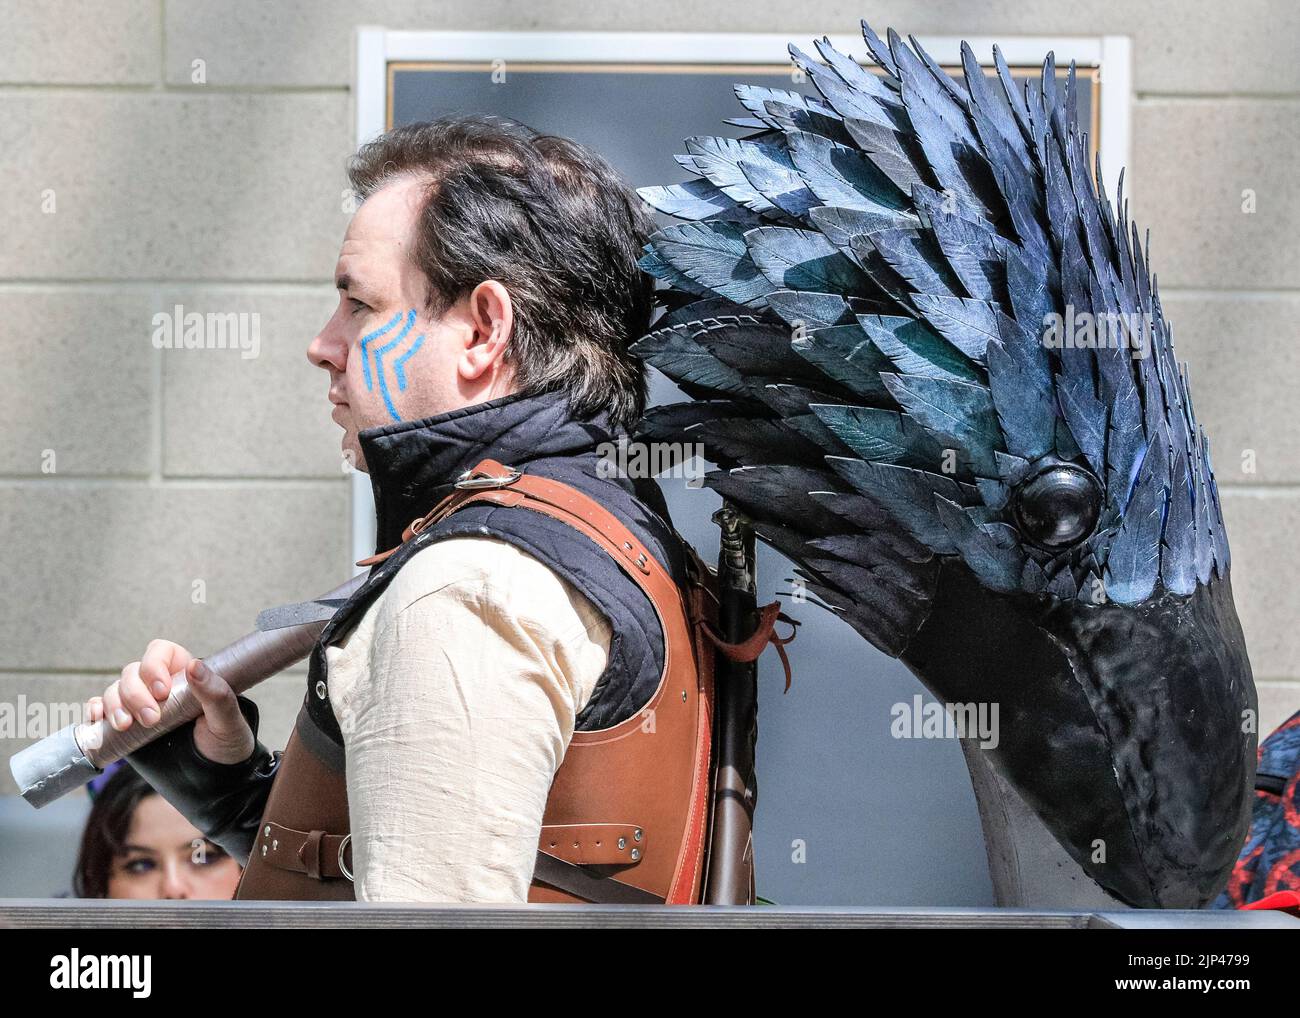 Cosplayer carries what appears to be a raven's  or other bird's head, Comic Con London, UK Stock Photo